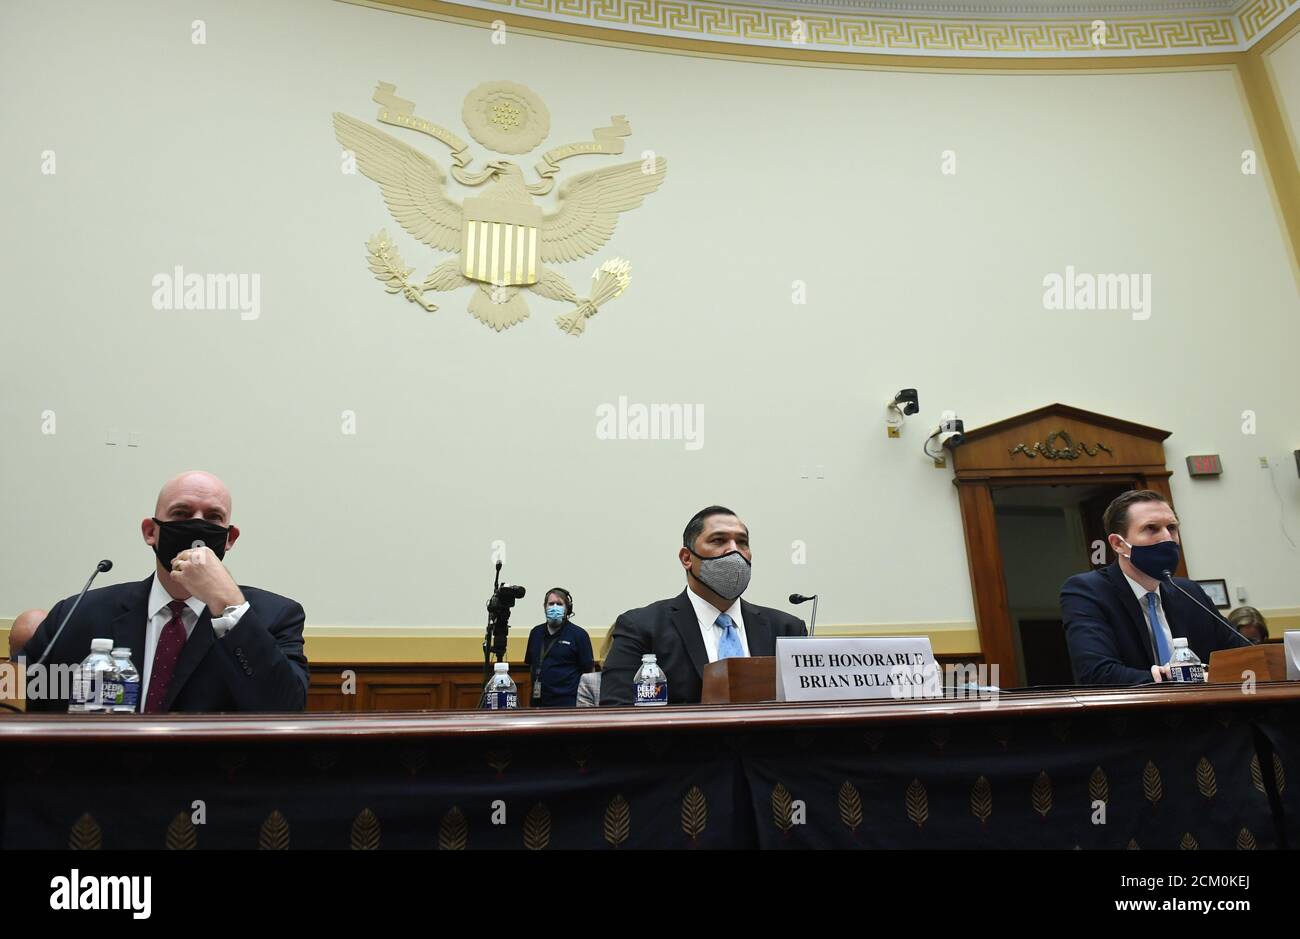 R. Clarke Cooper (L), Assistant Secretary of State for Political-Military Affairs, Brian Bulatao (C), Under Secretary of State for Management, and Marik String, Acting Legal Adviser for the State Department, testify before a House Committee on Foreign Affairs hearing looking into the firing of State Department Inspector General Steven Linick, on Capitol Hill in Washington, DC on Wednesday, September 16, 2020.Credit: Kevin Dietsch/Pool via CNP | usage worldwide Stock Photo